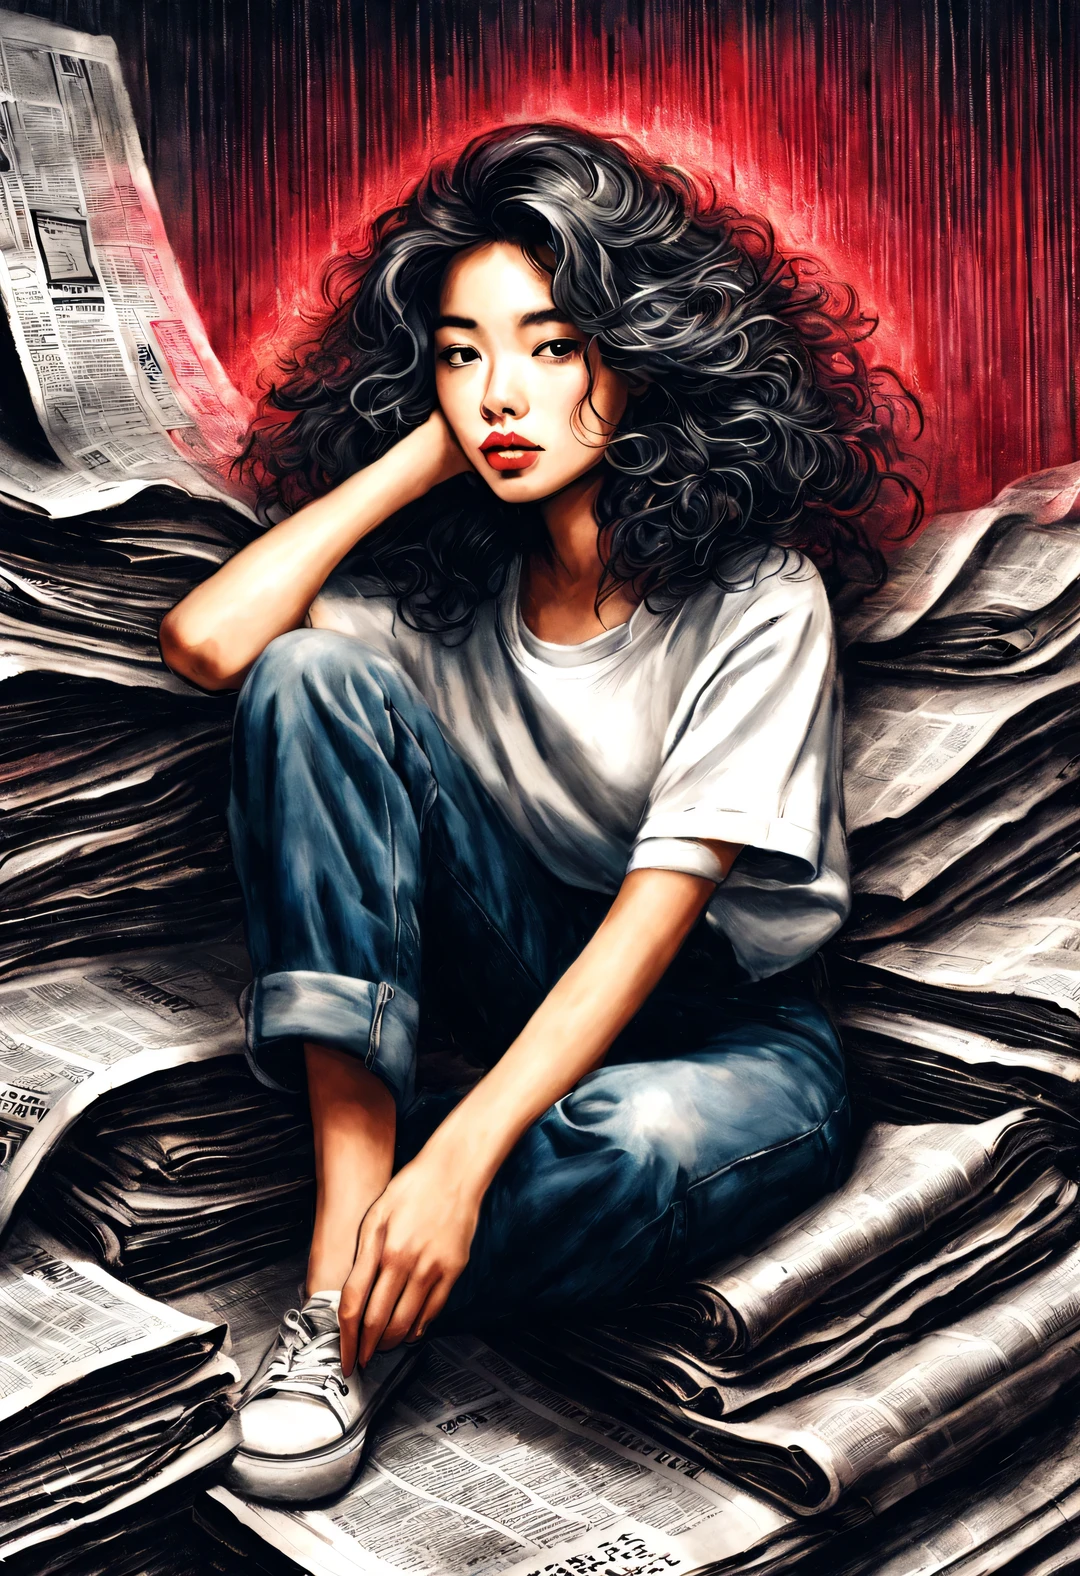 (Graphite painting), (A beautiful charming girl sits cross-legged on a mountain of old newspapers in the basement), (She is wearing a white crew neck shirt and jeans), A young and wild Asian face, Slightly mixed face shape, (Slightly square chin: 0.4), Messy and too long, Hard curly hair, Lazy, (perfect face), The slender eyes narrowed slightly, sports shoes, (Industrial lights on the roof emit a dim, weak red light: 1.34),
background: The basement is covered with many old newspapers and dilapidated walls, industrial style, retro shabby,
90's anime style, Bold silhouettes, Graphic arts, line art, black and white, line art with pen pressure, Pen pressure sketch, Calligraphy pen with pen pressure, G pen style，With pen pressure, Hand drawn thick lines, high contrast, IG model,